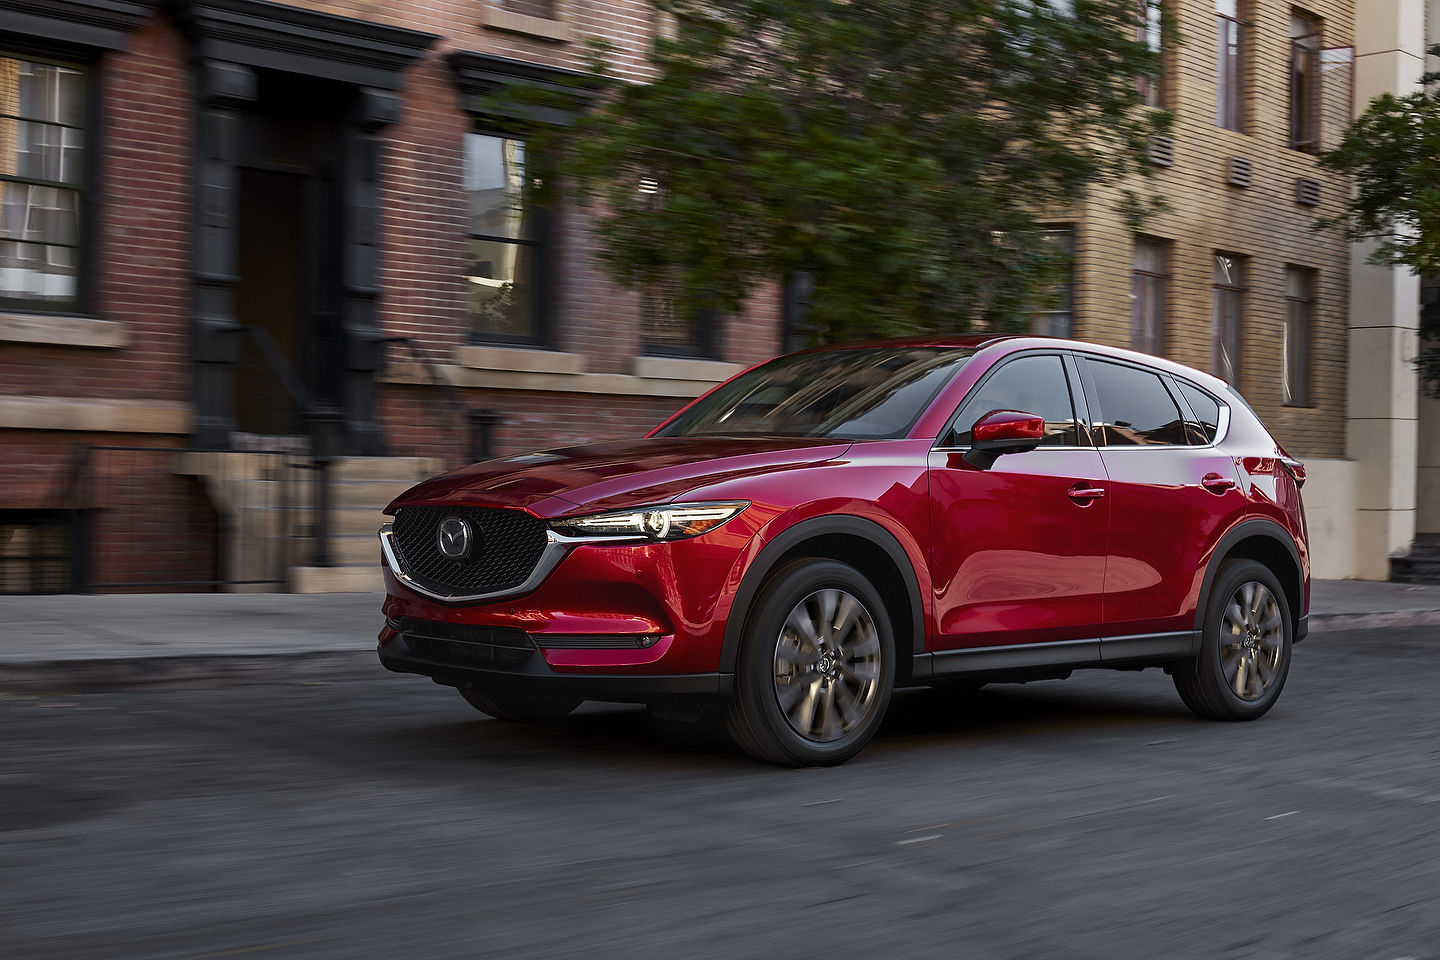 2021 Mazda CX-5 vs. 2021 Toyota RAV4: The CX-5 Offers Value and Performance